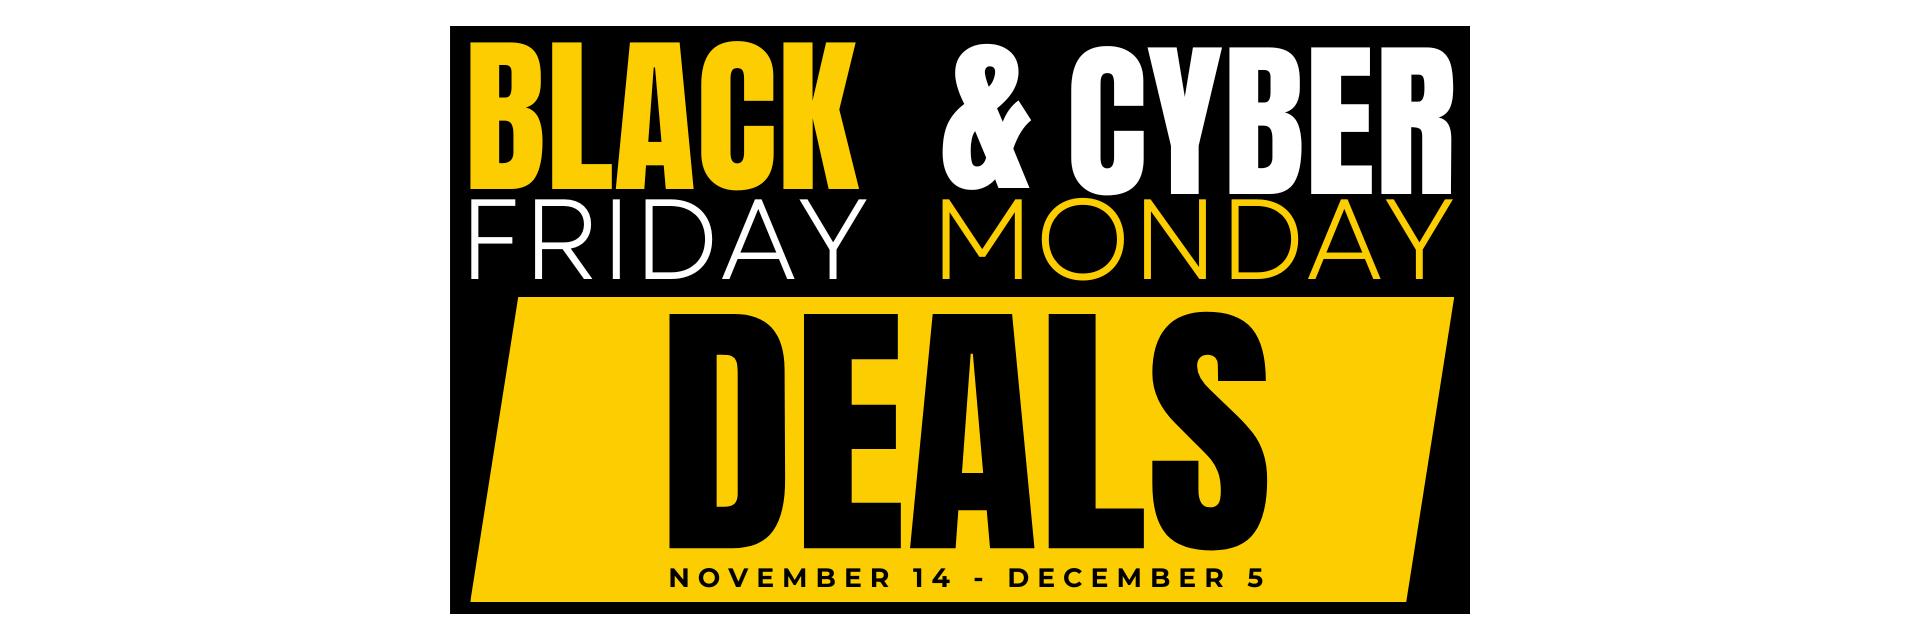 Black Friday & Cyber Monday Deals at West Point Cycles | Nov 14 - Dec 5